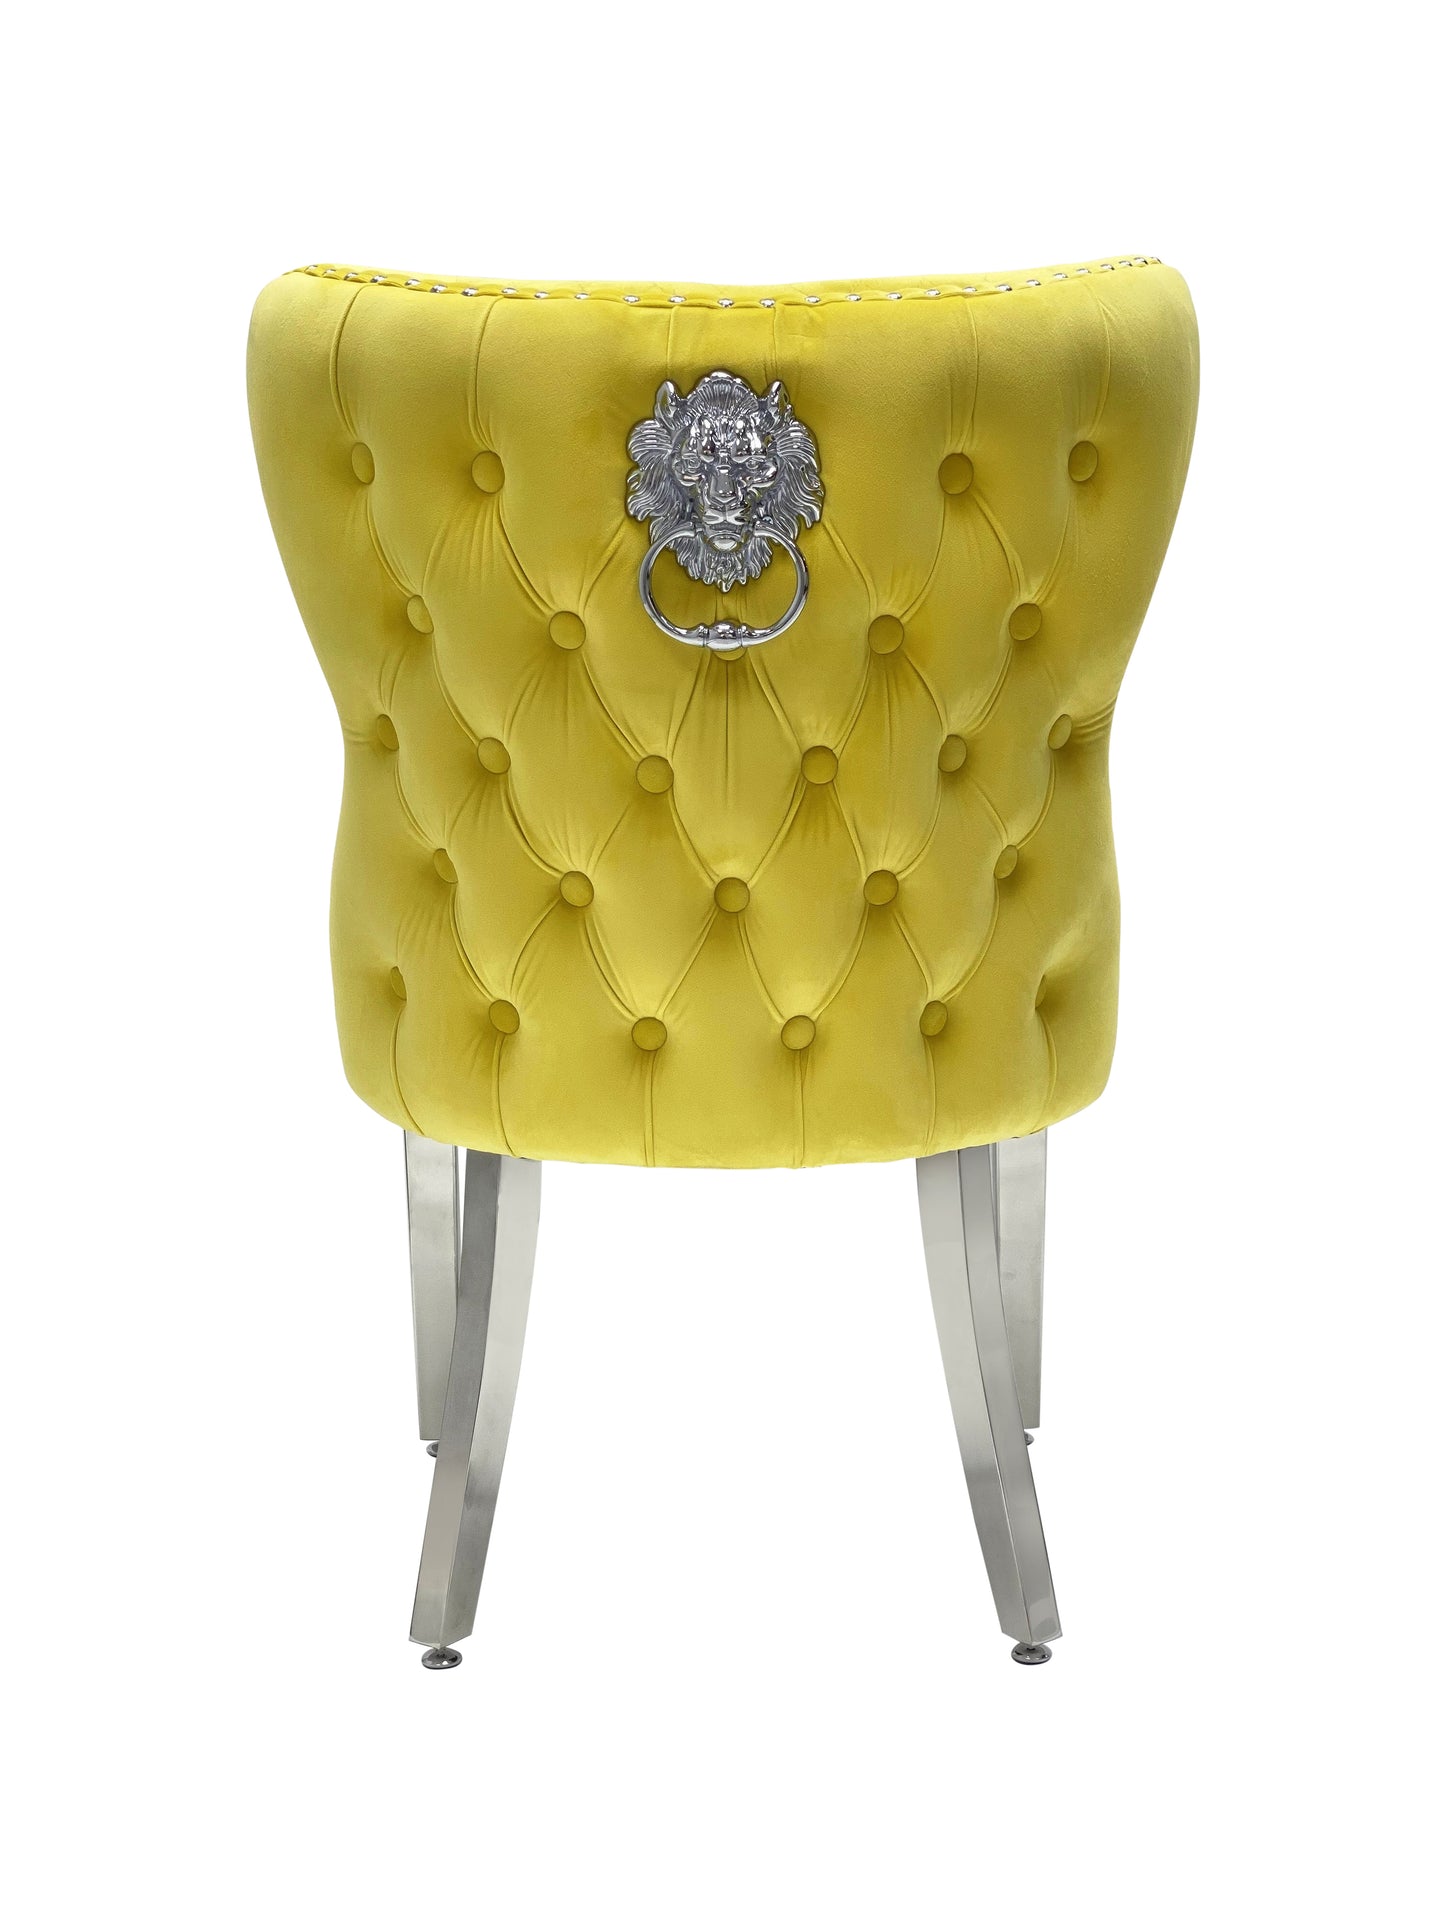 Dining Chair in Mustard Plush Velvet Lion Knocker Head Lewis Buttoned Back Quilted Front Studs on the Edge with Chrome Legs (Set of 2 chairs)